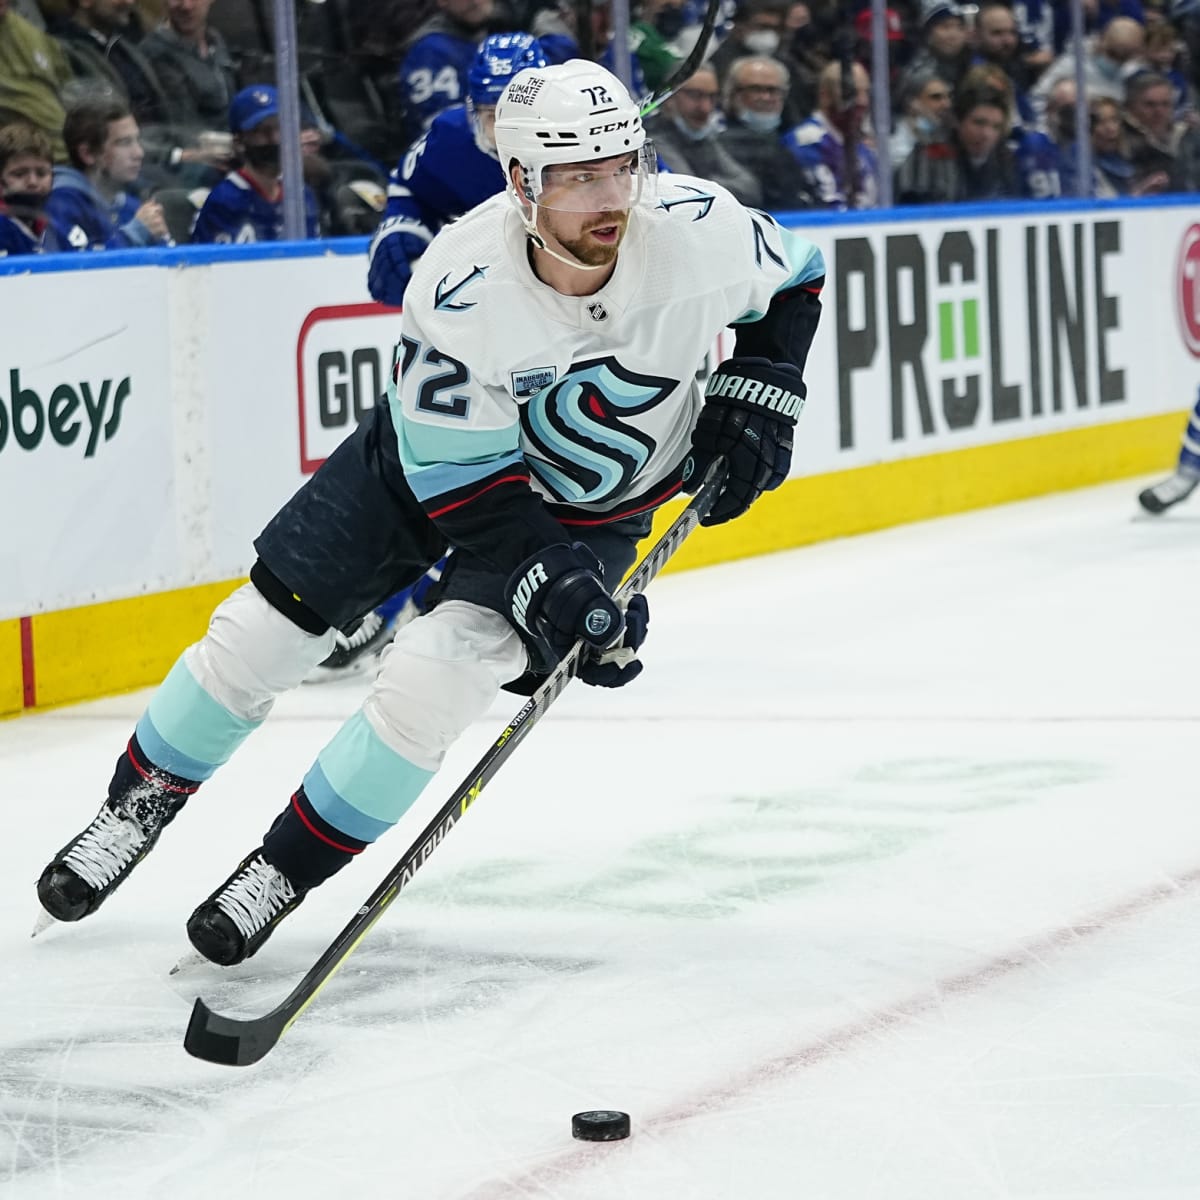 Donskoi Gets It Done For Sharks